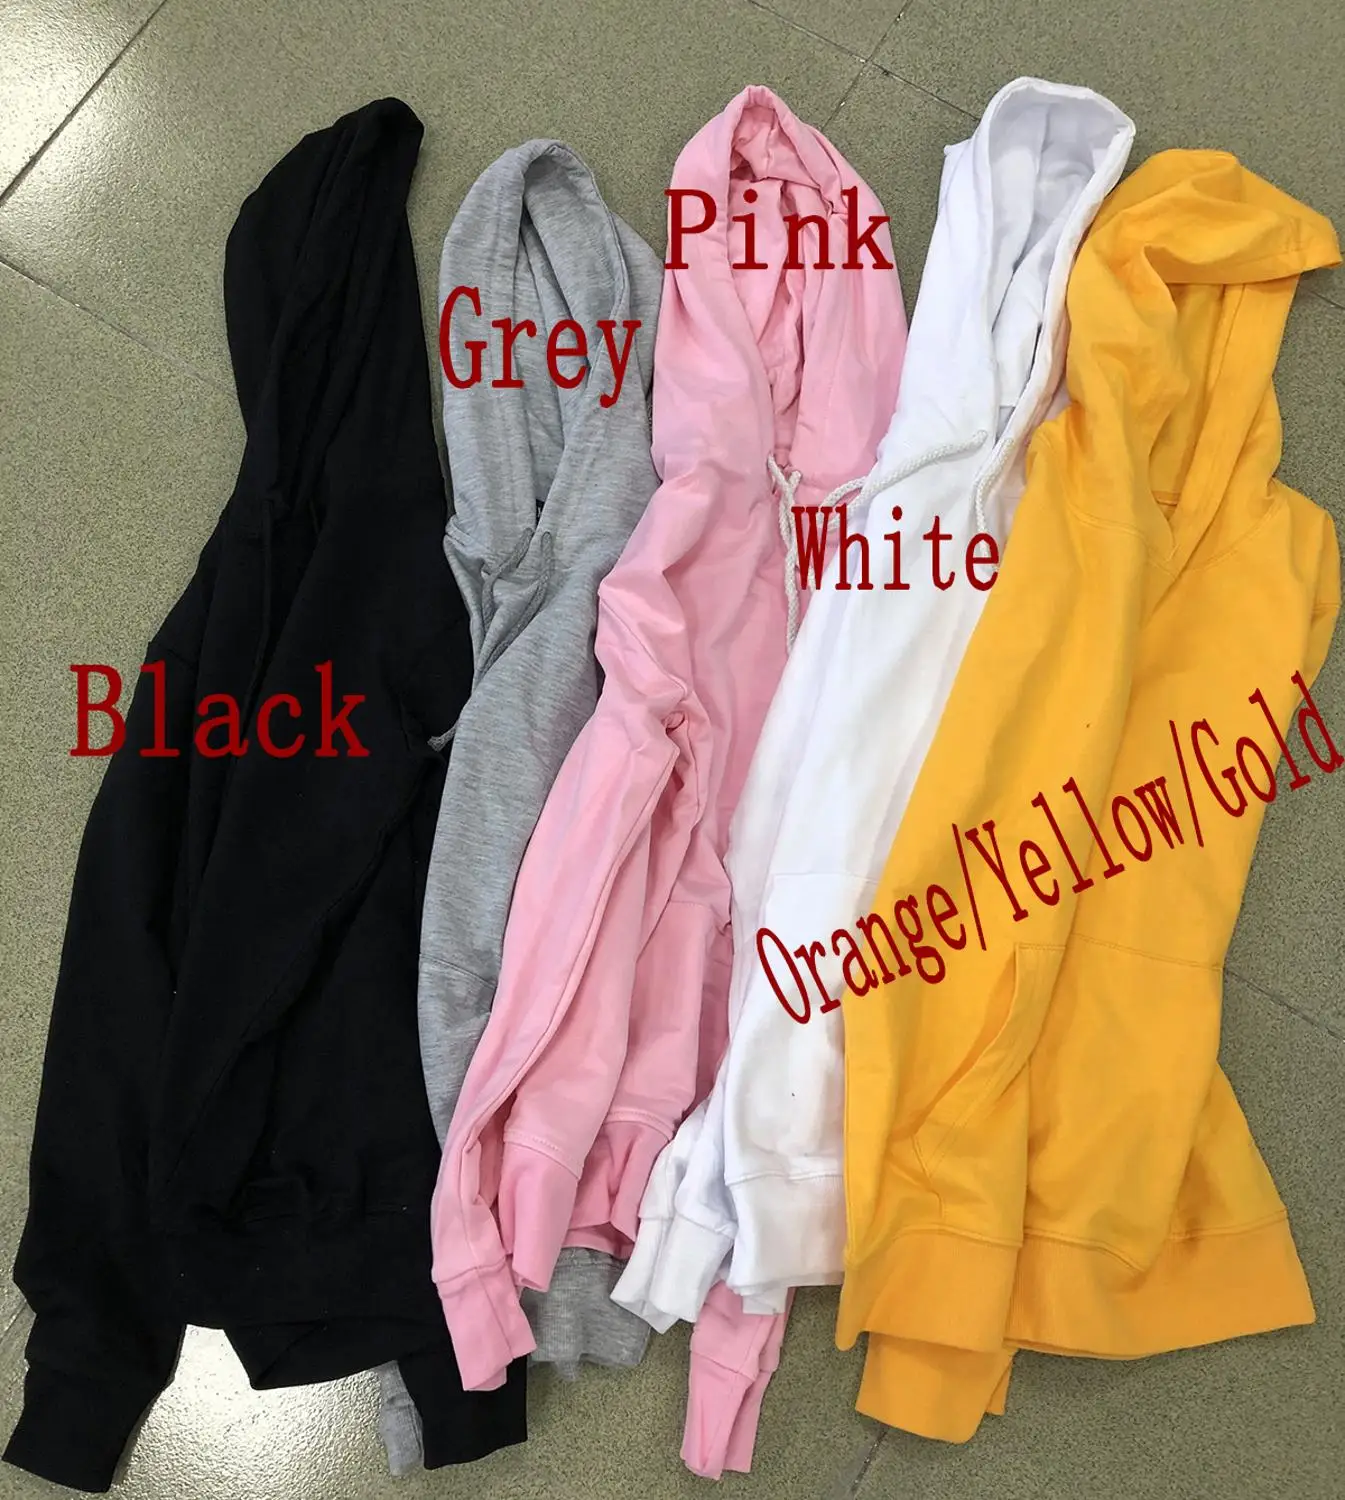 

Bee positive hoodies women fashion cotton casual funny slogan grunge tumblr cute kawaii pullovers young hipster gift tops M204